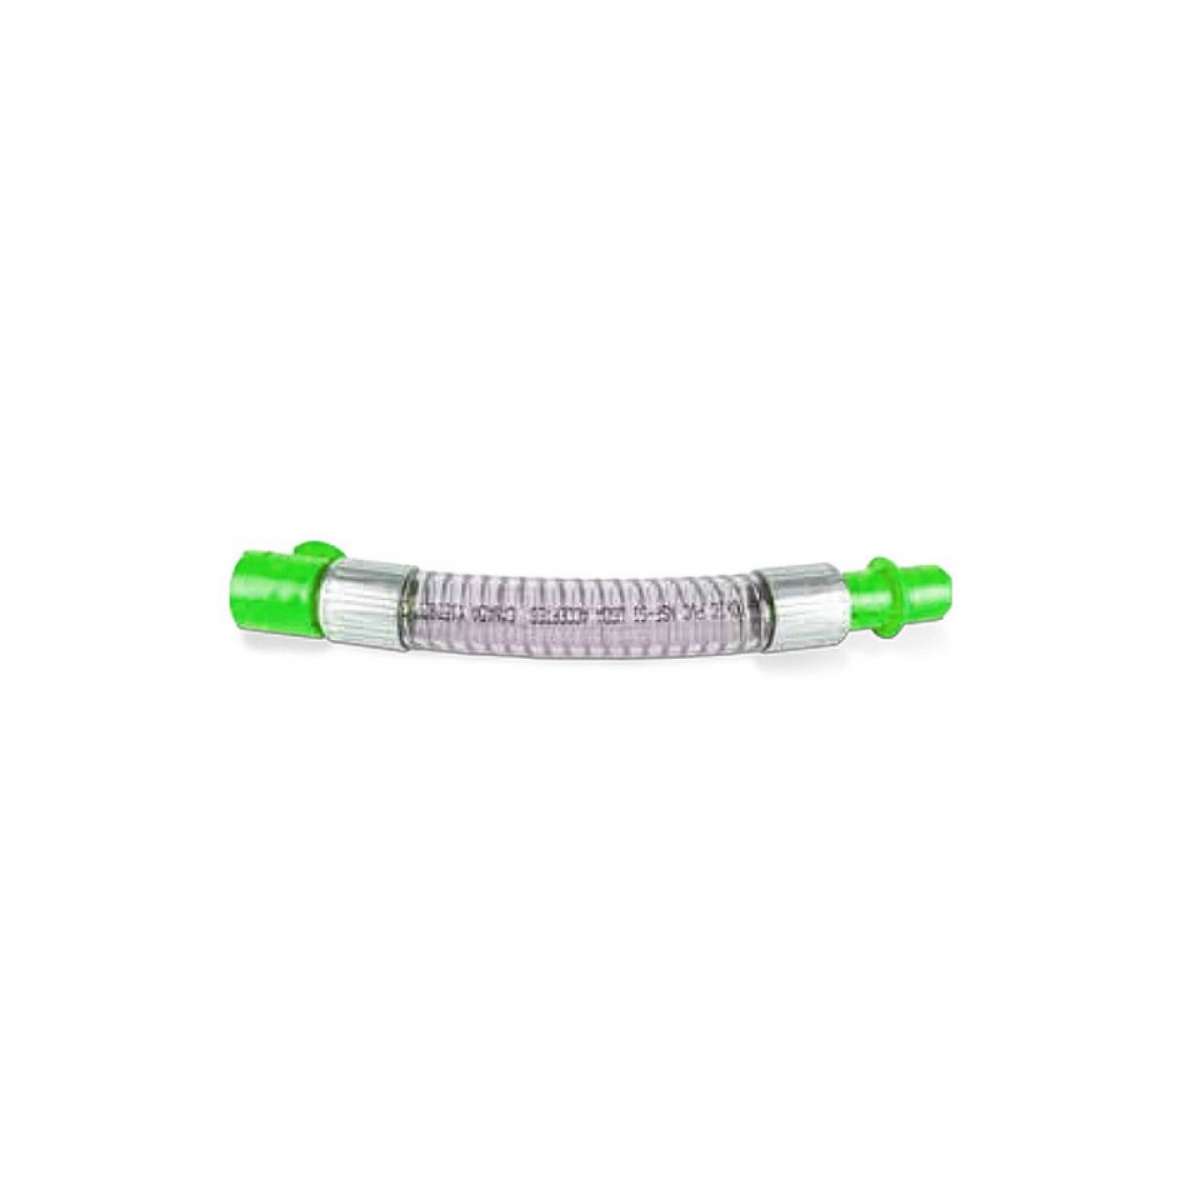 IsoLink 16" Extended Spout with 1" Tip - Light Green